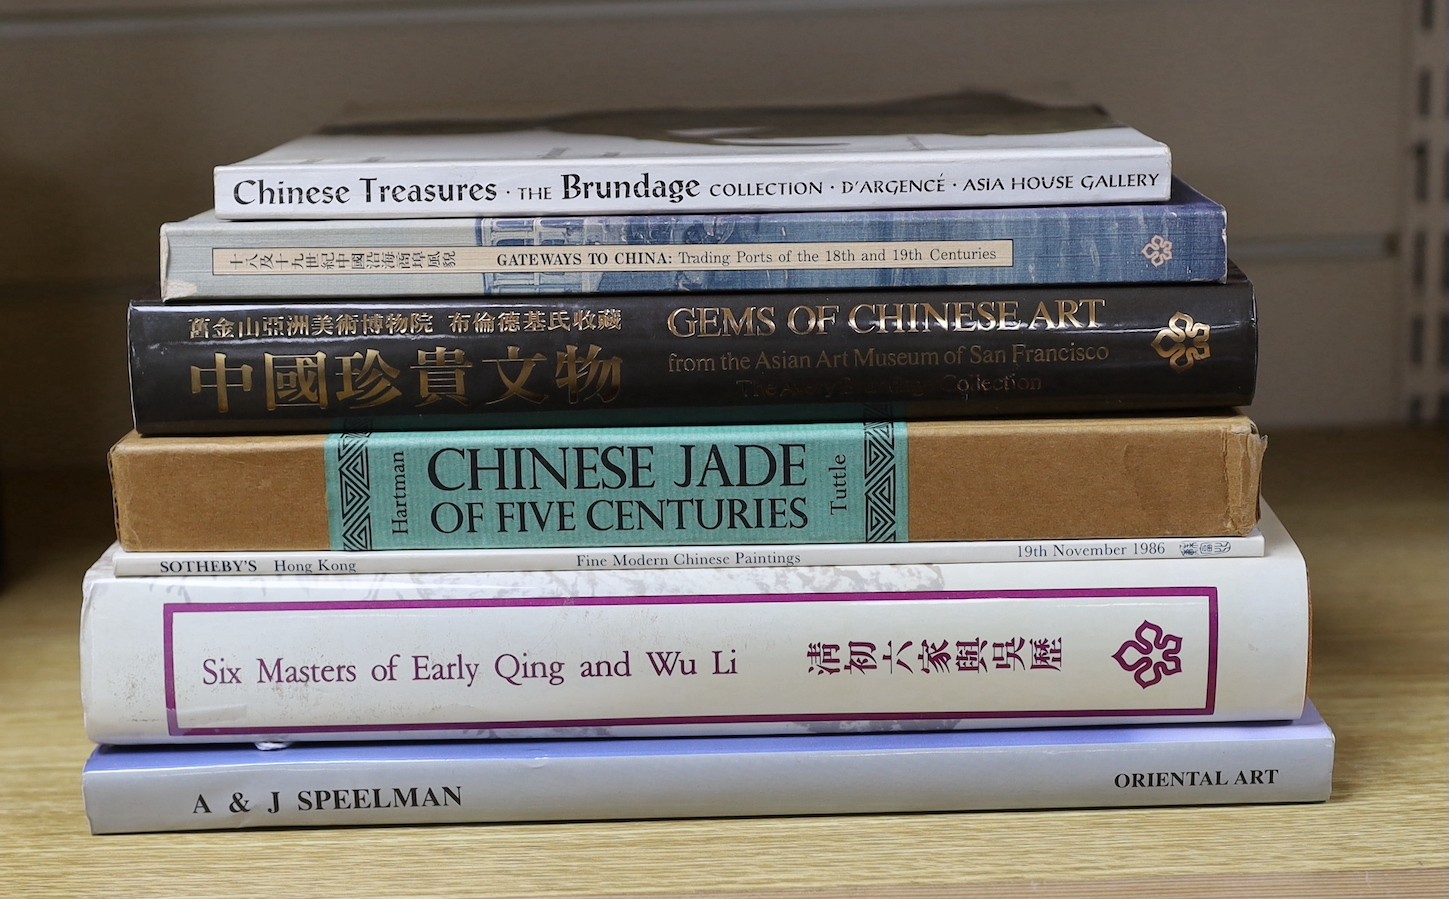 A collection of reference books on Chinese paintings, works of art and jade, including Chinese Jade of five centuries, Chinese Treasures the Brundage collection, six Masters of early Qing and Wuli etc.